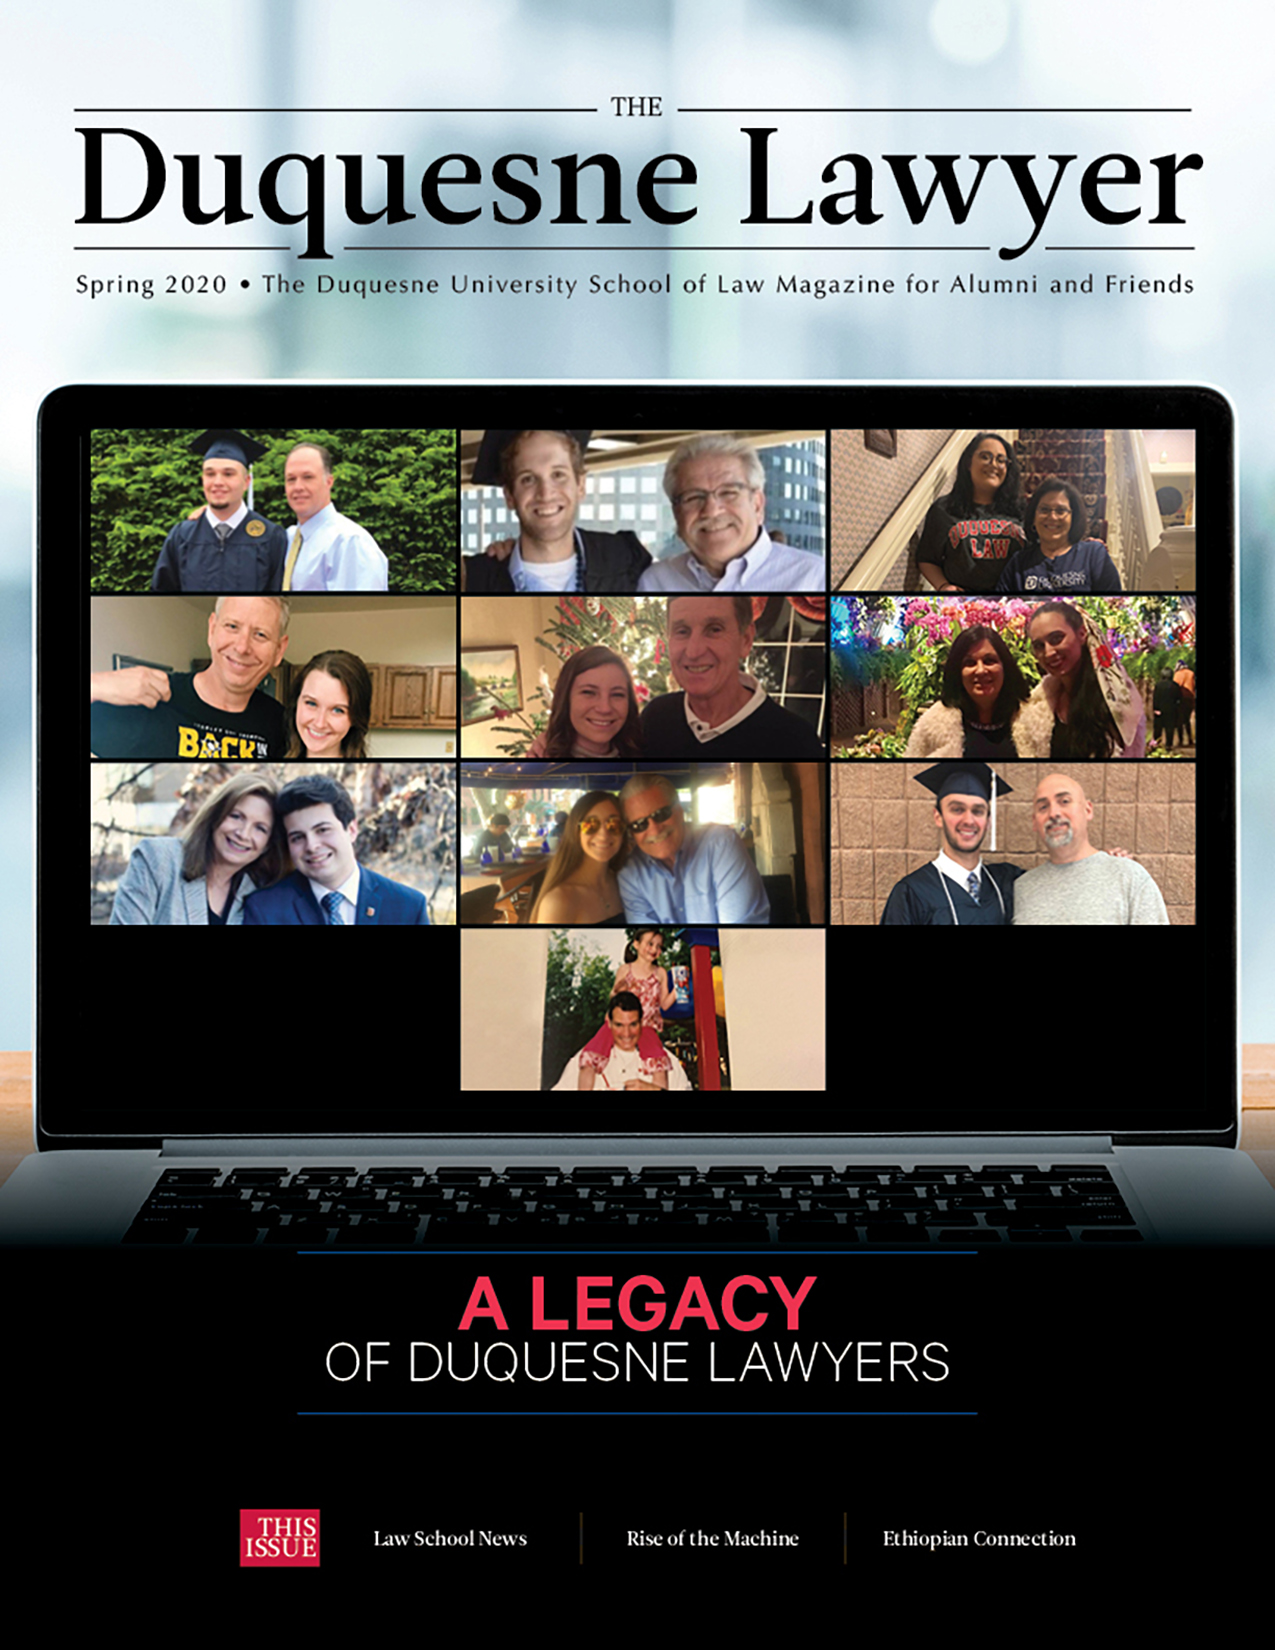 Duquesne Lawyer Magazine Spring 2020 issue